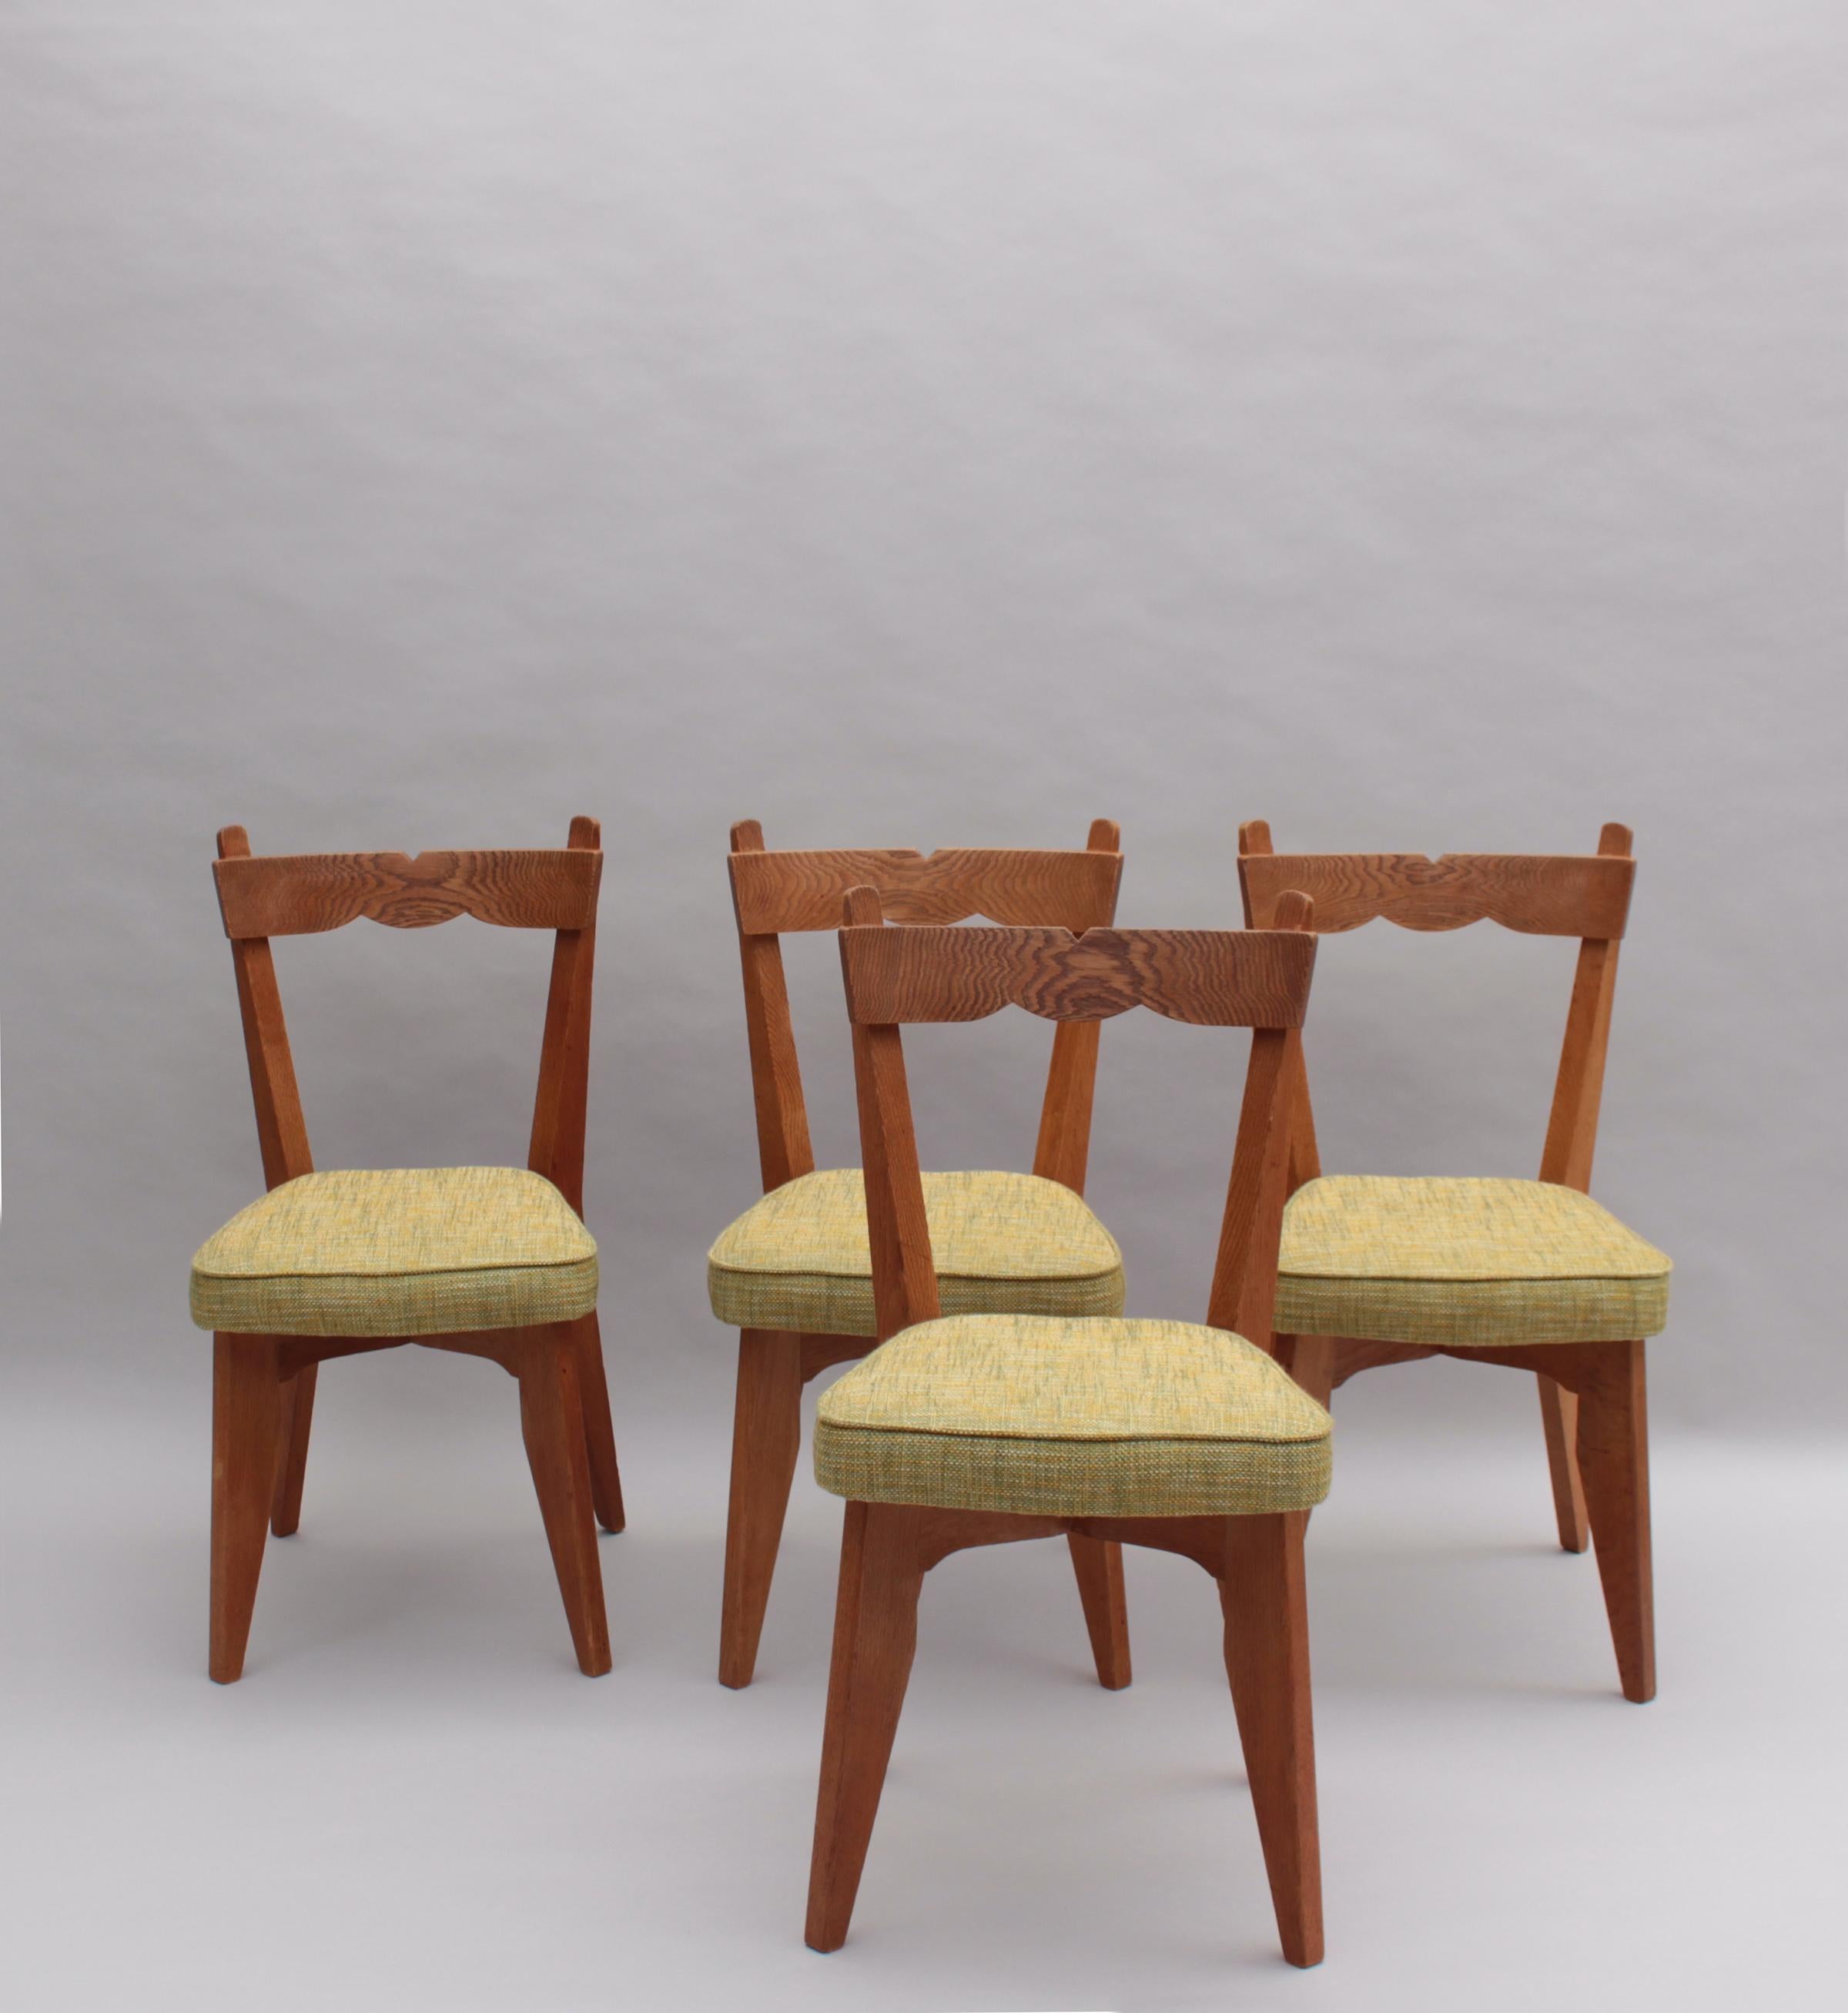 Robert Guillerme (1913-1990) and Jacques Chambron (1914-2001) for Votre Maison (editor) : A set of four fine French mid-century solid oak dining chairs 

A matching table is available (not included in price) see last pictures.
1stdibs ref#